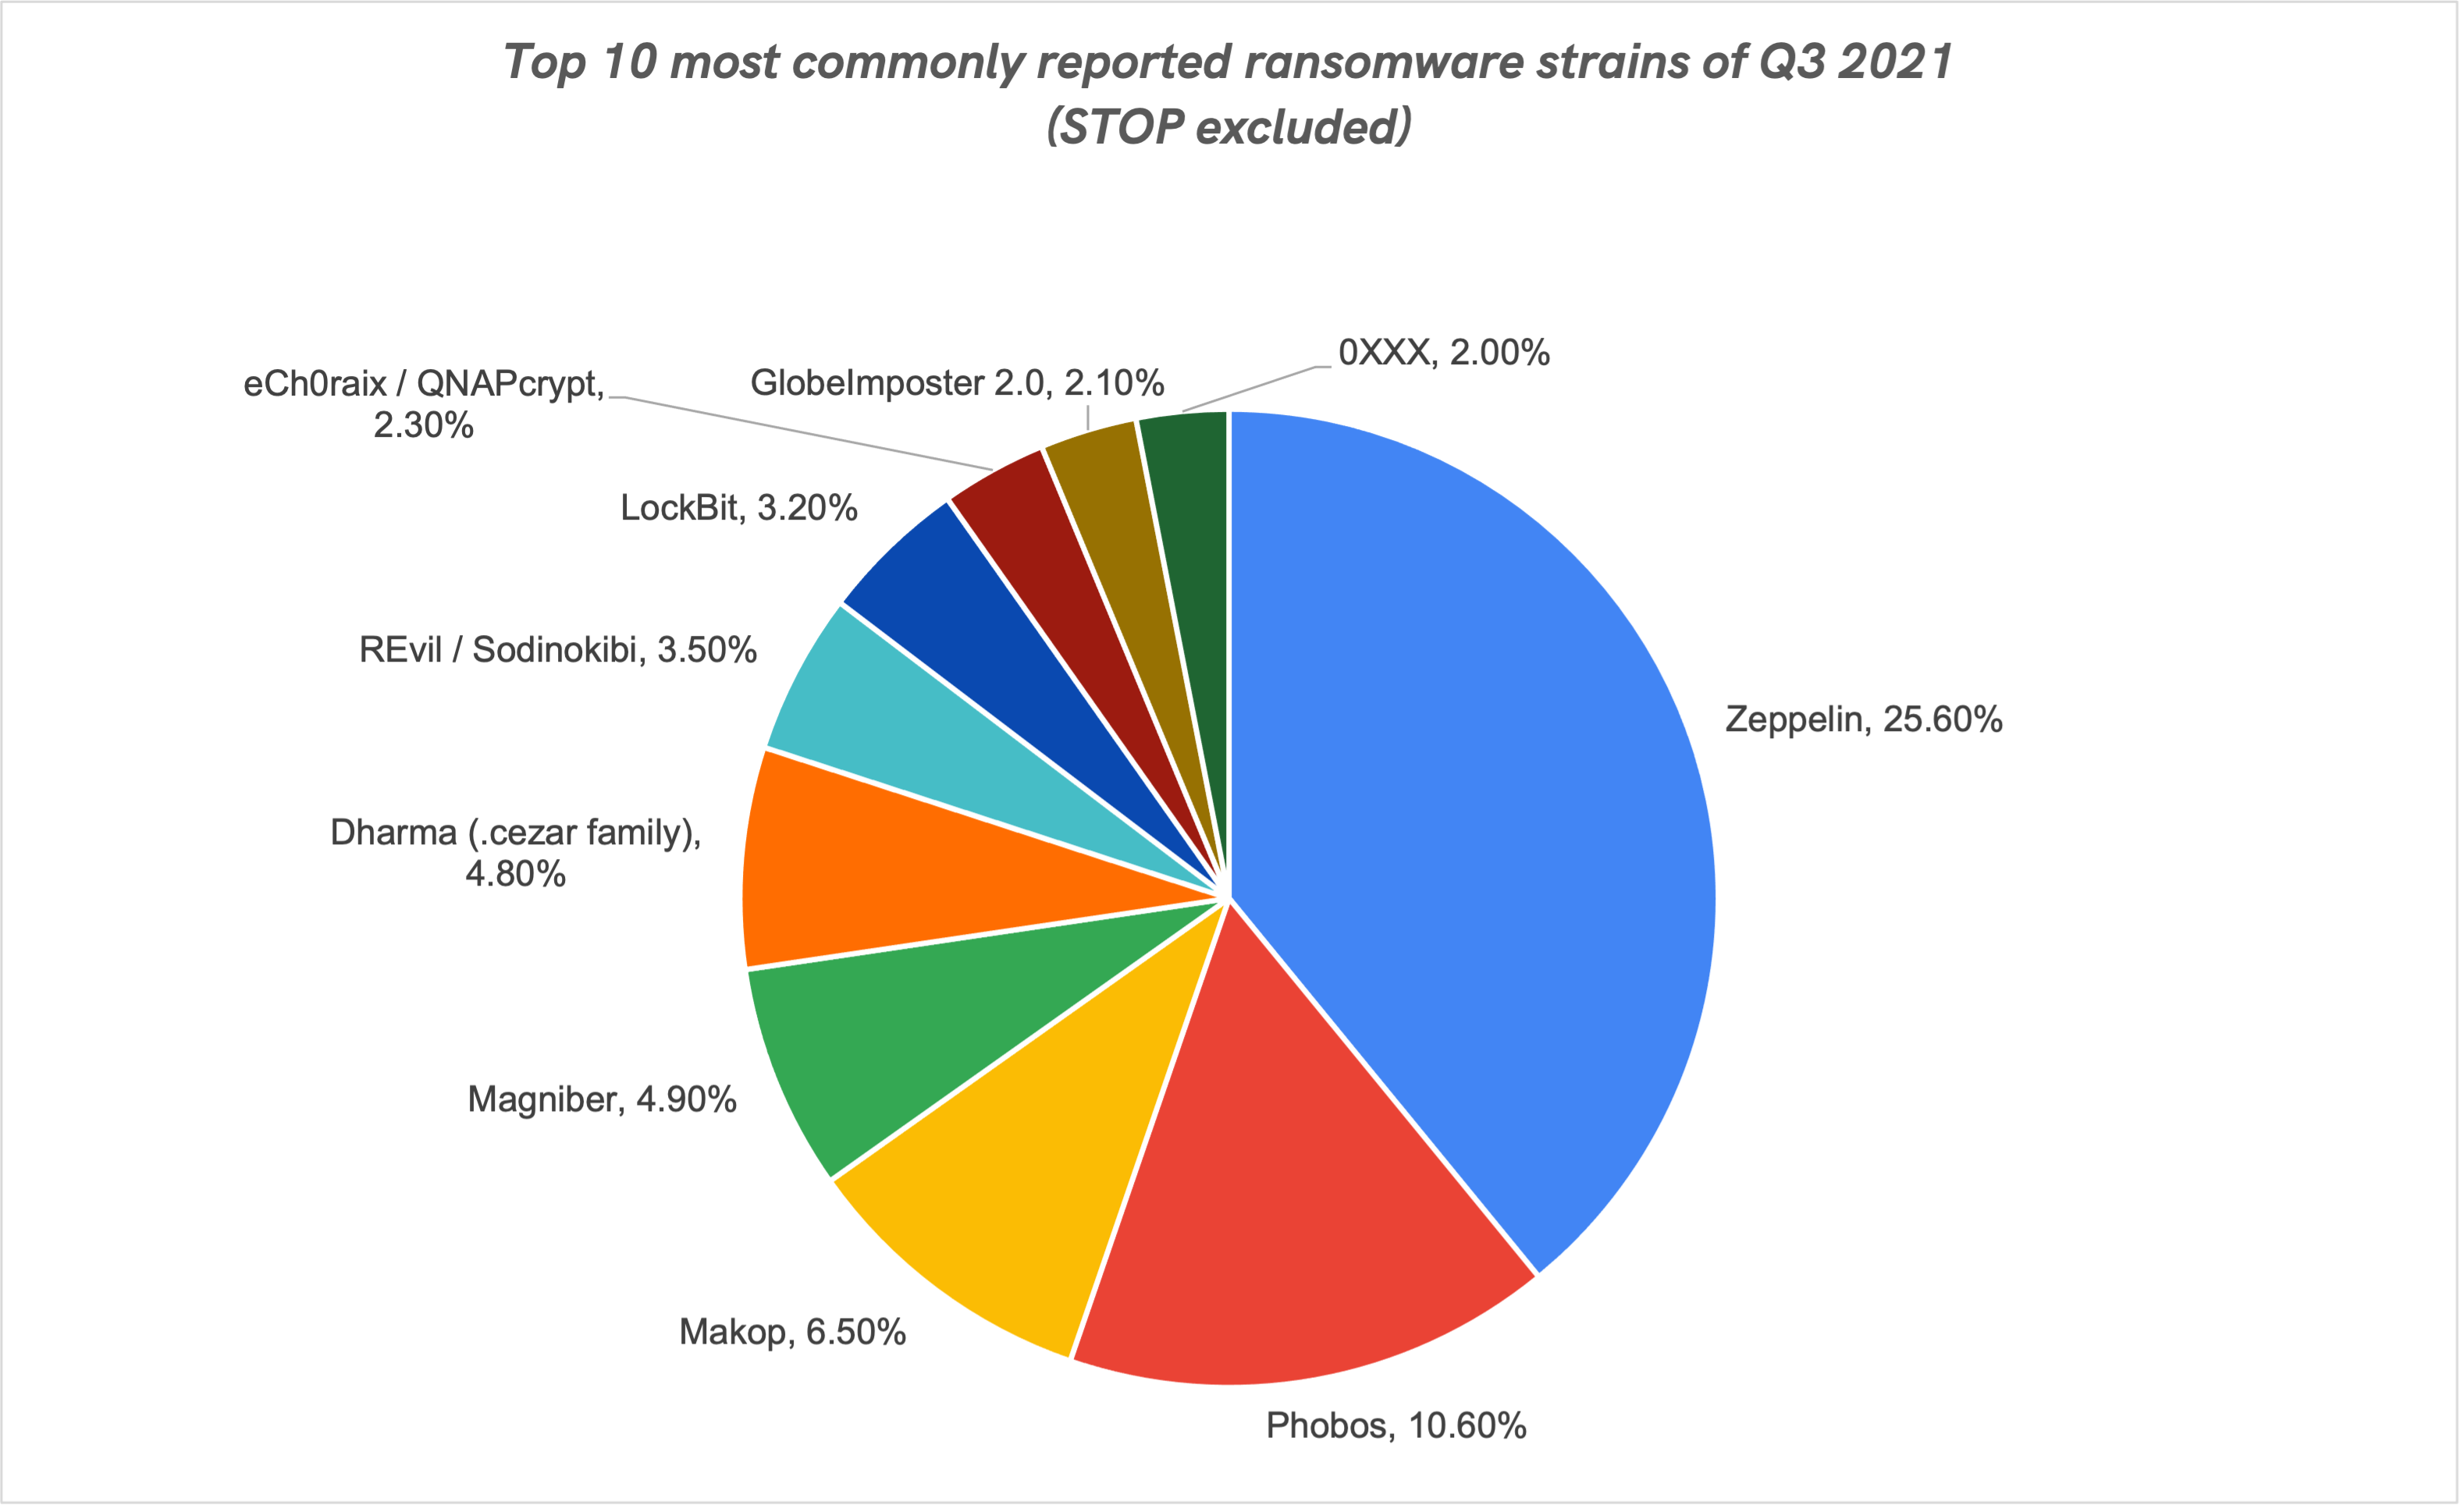 Top 10 most commonly reported ransomware strains of Q3 2021 (STOP excluded)